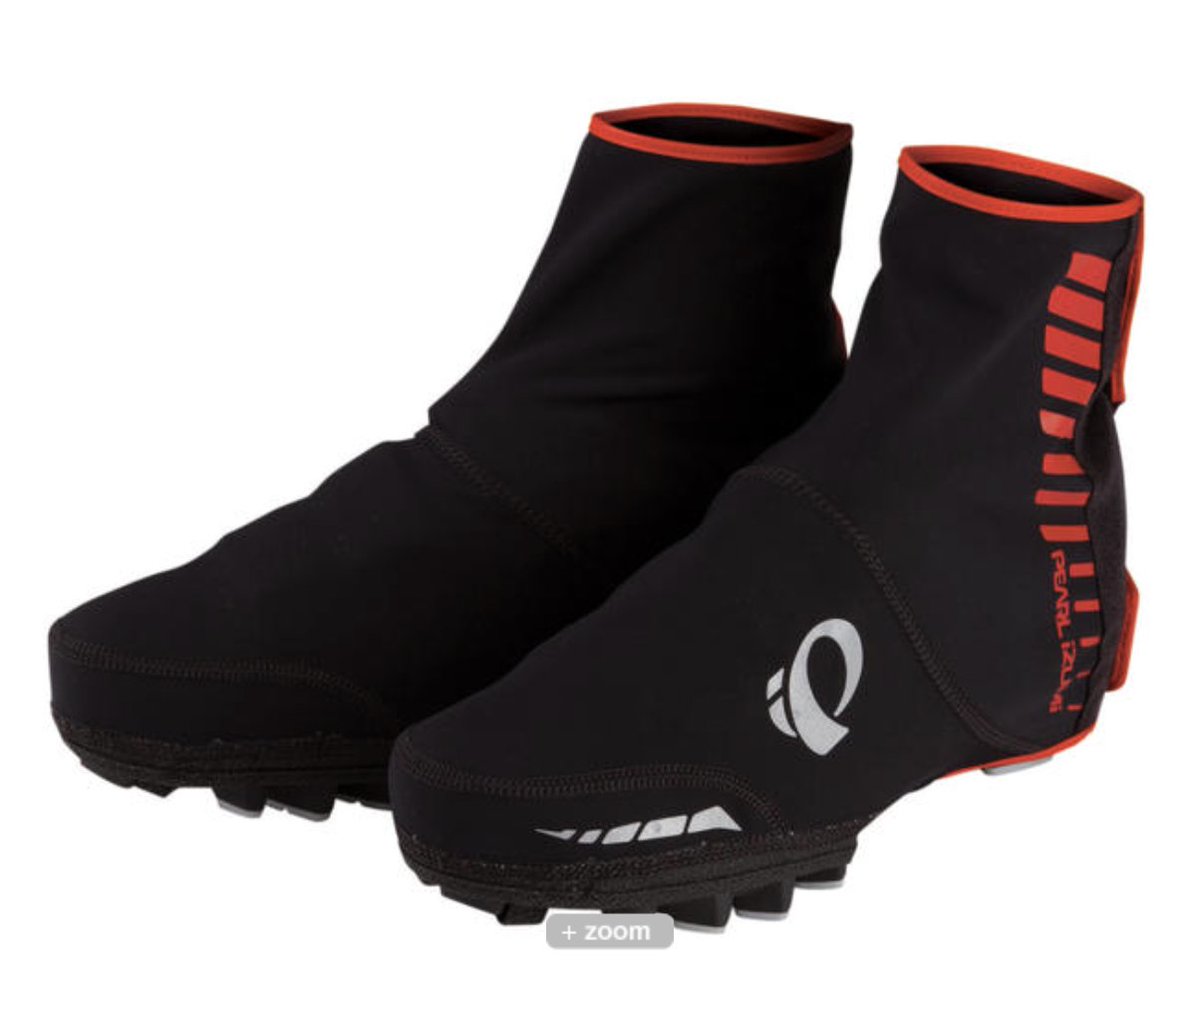 FACT--It's easier to keep riding into cooler weather if your feet are warm! Stop in to find shoe covers, gloves and other accessories to keep you toasty this Fall! ow.ly/kMZN50PECxV #russellsfitness #bikegear #booties #fallcyclingkit #shoecovers